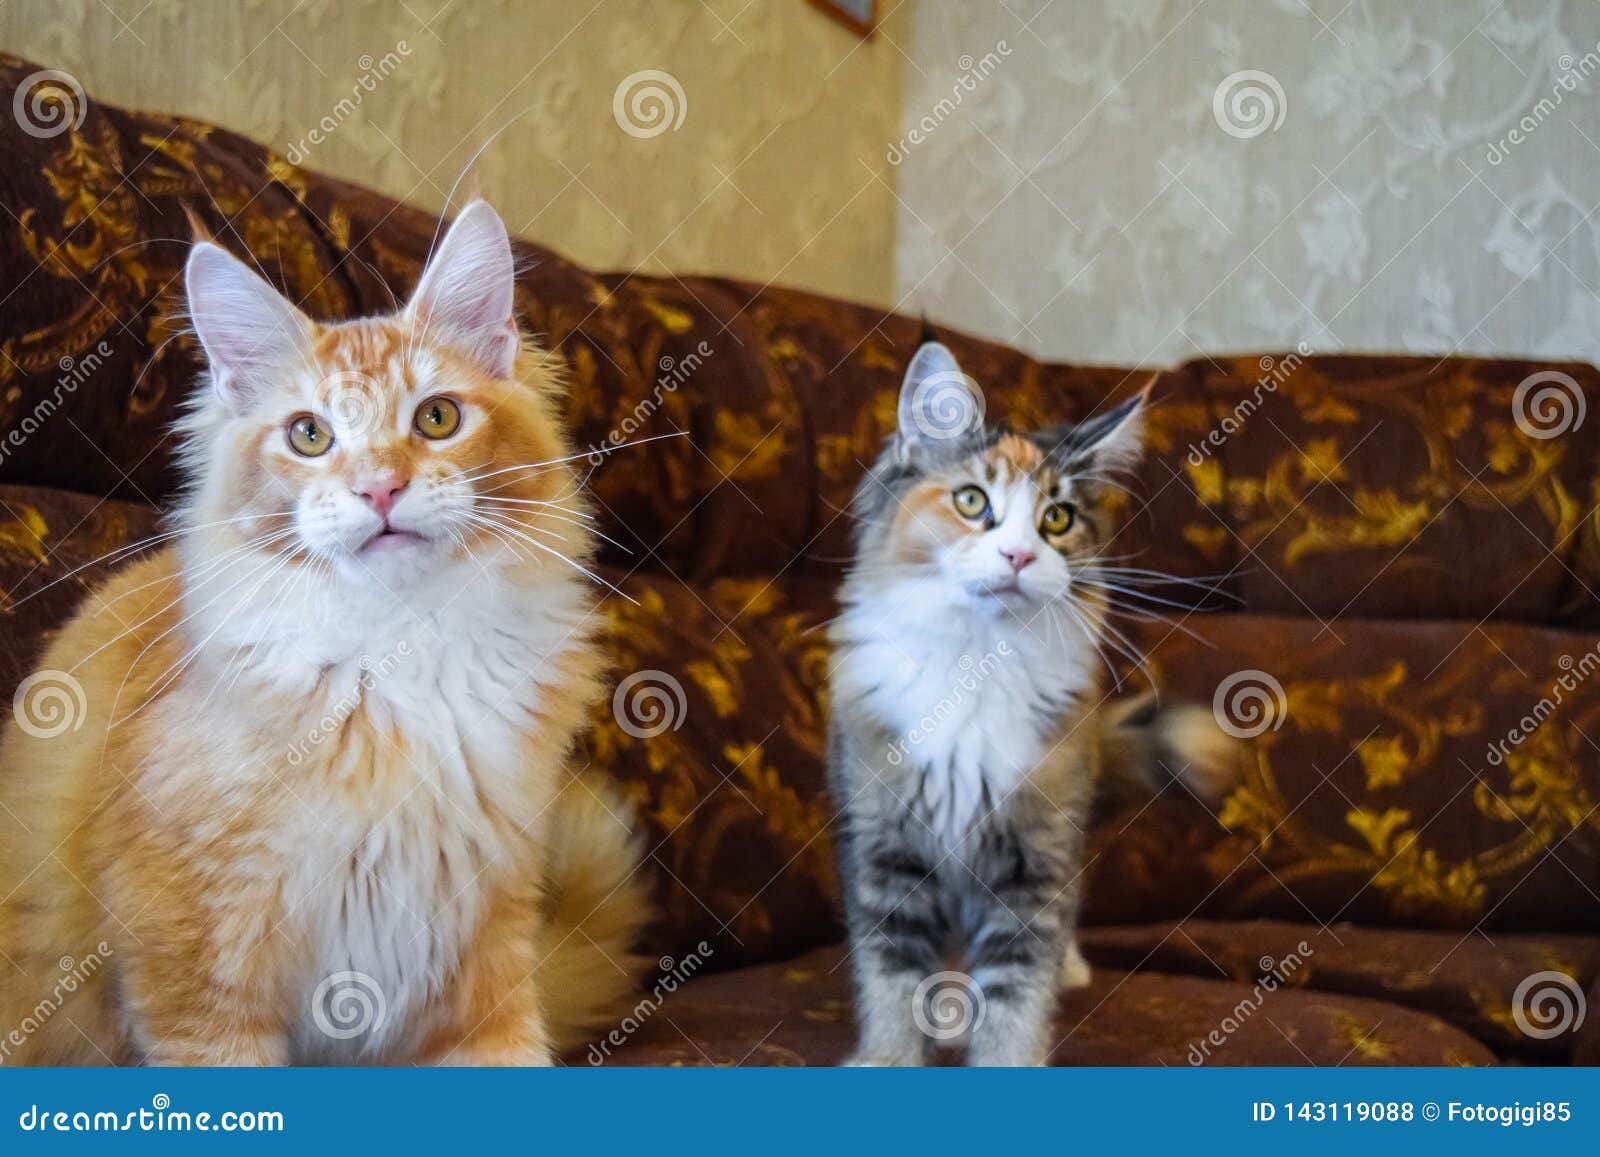 Giant Maine Coon Cat. Mainecoon Cat, Breeding of Purebred Cats at Home ...